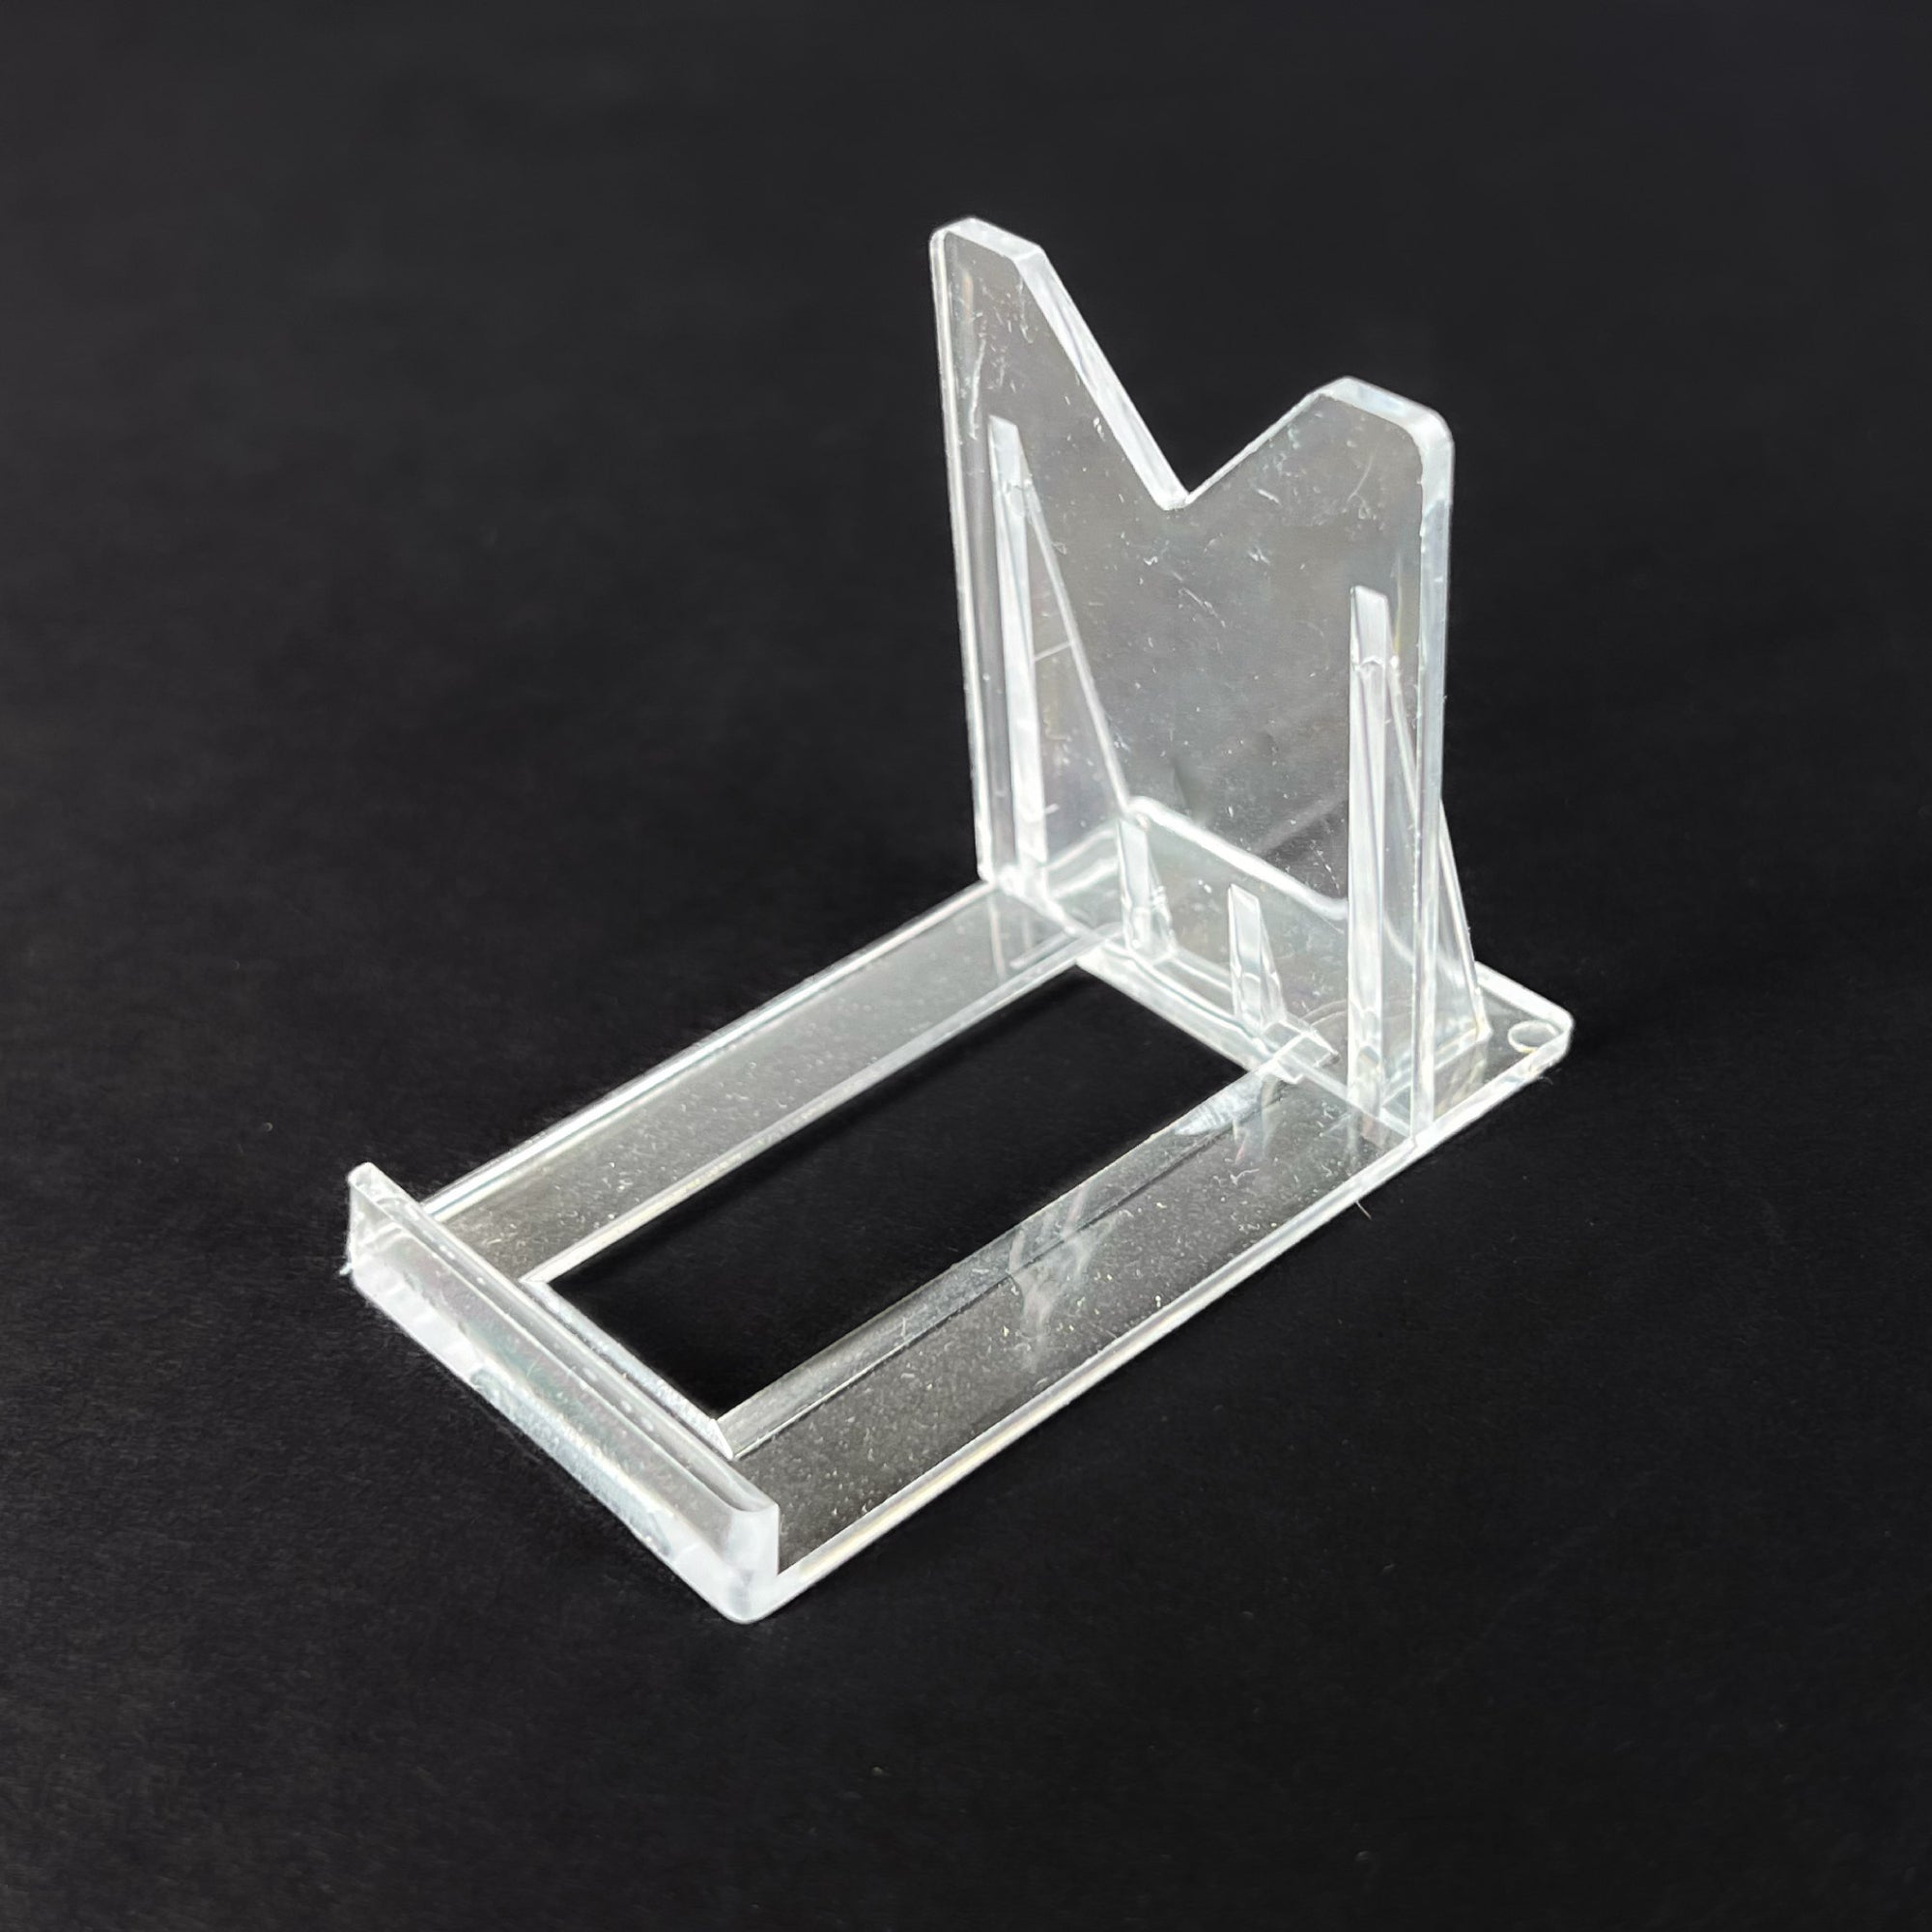 Adjustable 2 part Clear Acrylic Display Stand for Minerals and Fossils